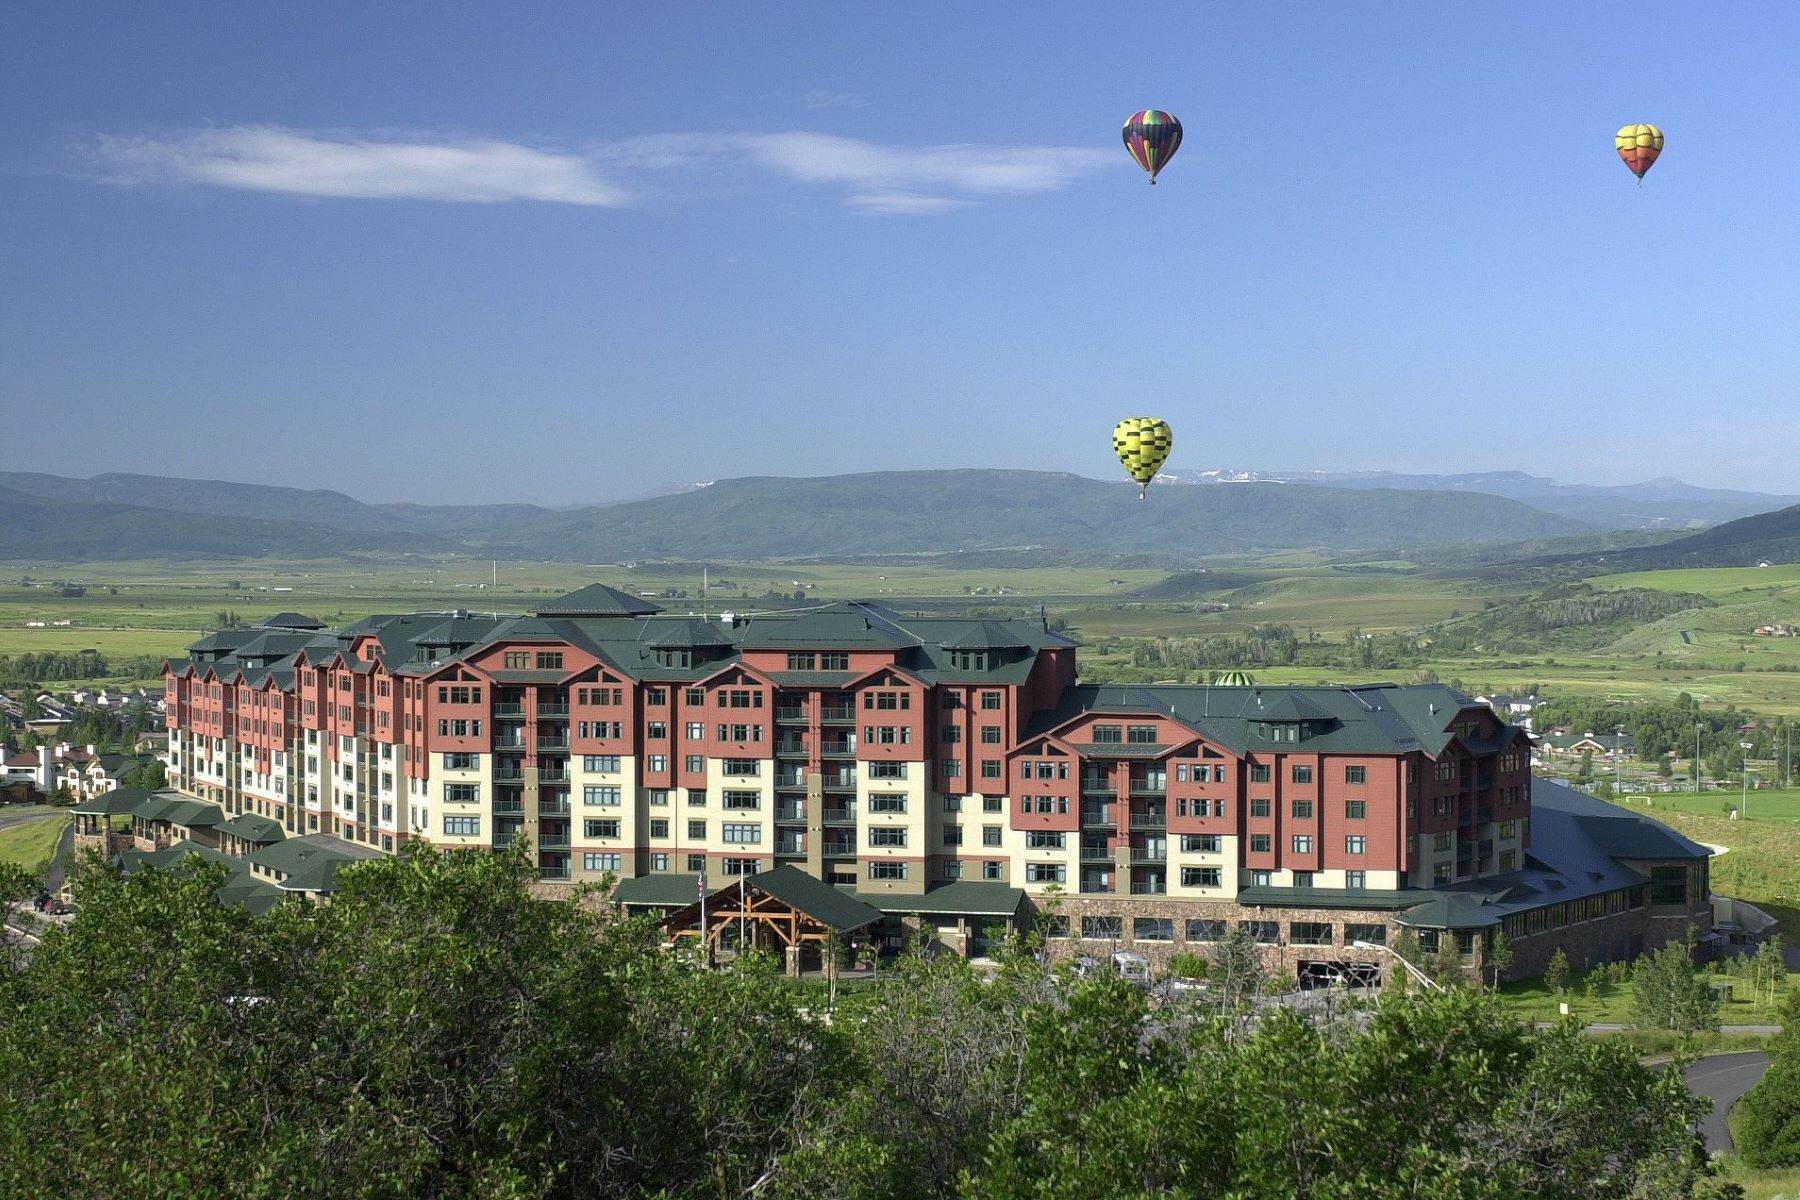 Fractional Ownership Property à 2300 Mt Werner Circle, Steamboat Springs, CO, 80487 2300 Mt Werner Circle, Unit# 629 IV Steamboat Springs, Colorado 80487 États-Unis